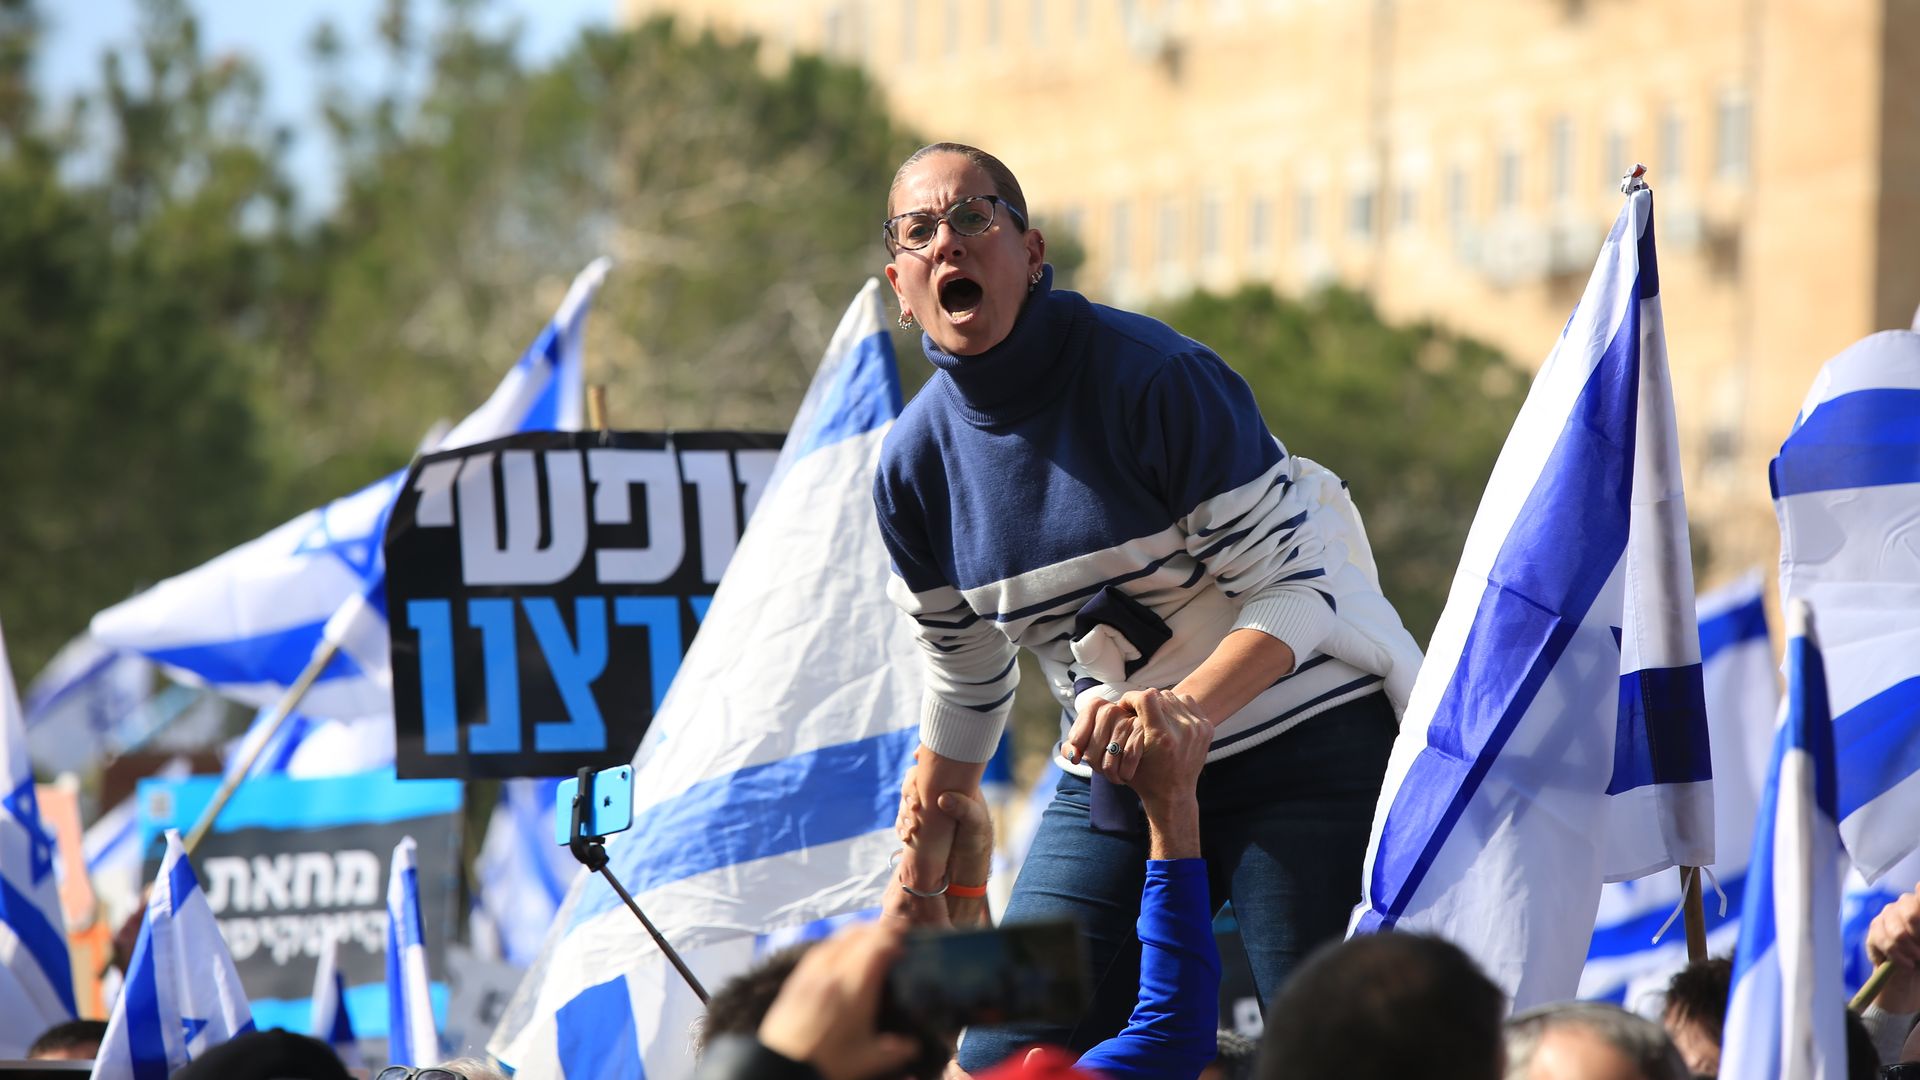 Israeli people, holding flags, gather in front of the parliament building (Knesset) to stage a demonstration against judicial reform plans during a preliminary vote in Jerusalem on February 13, 2023